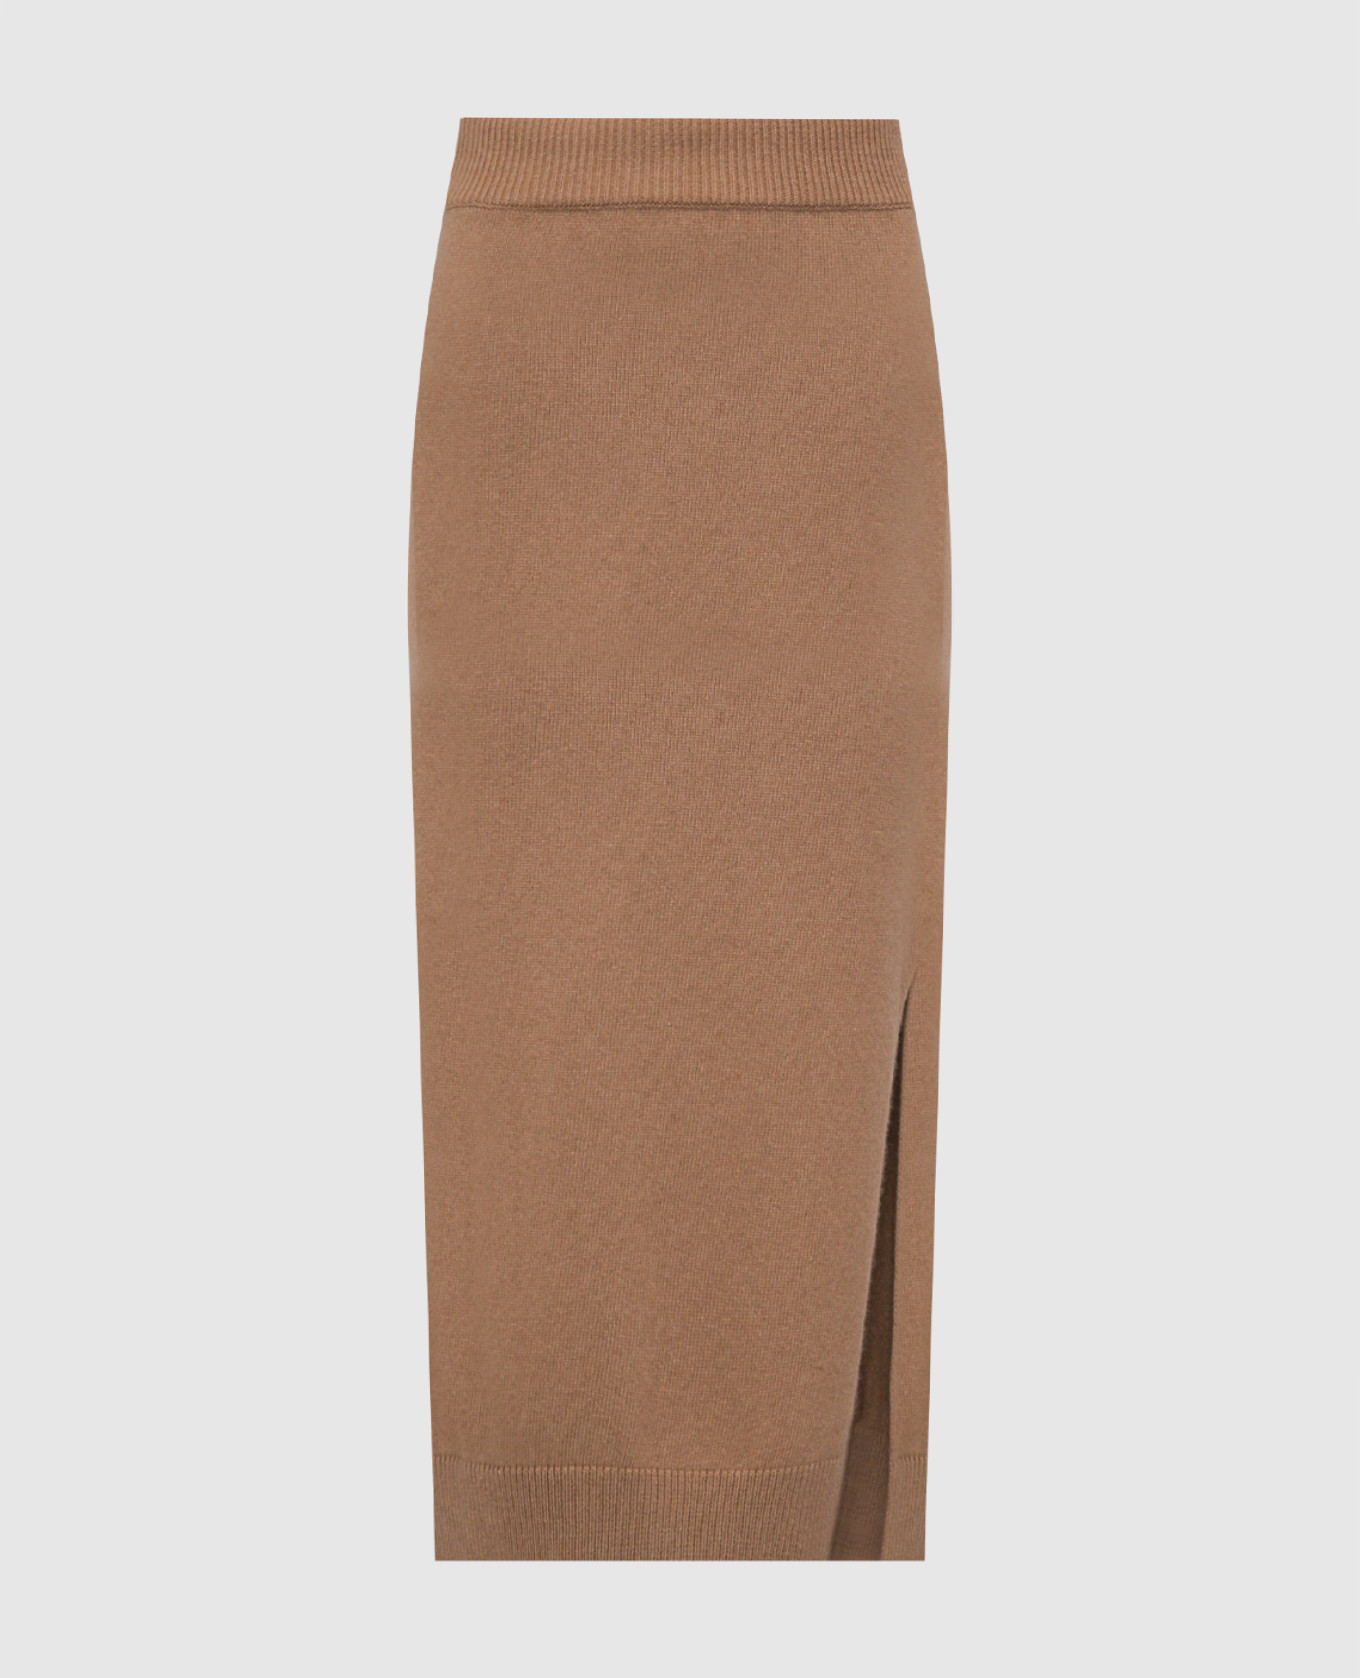 Brown skirt with a slit